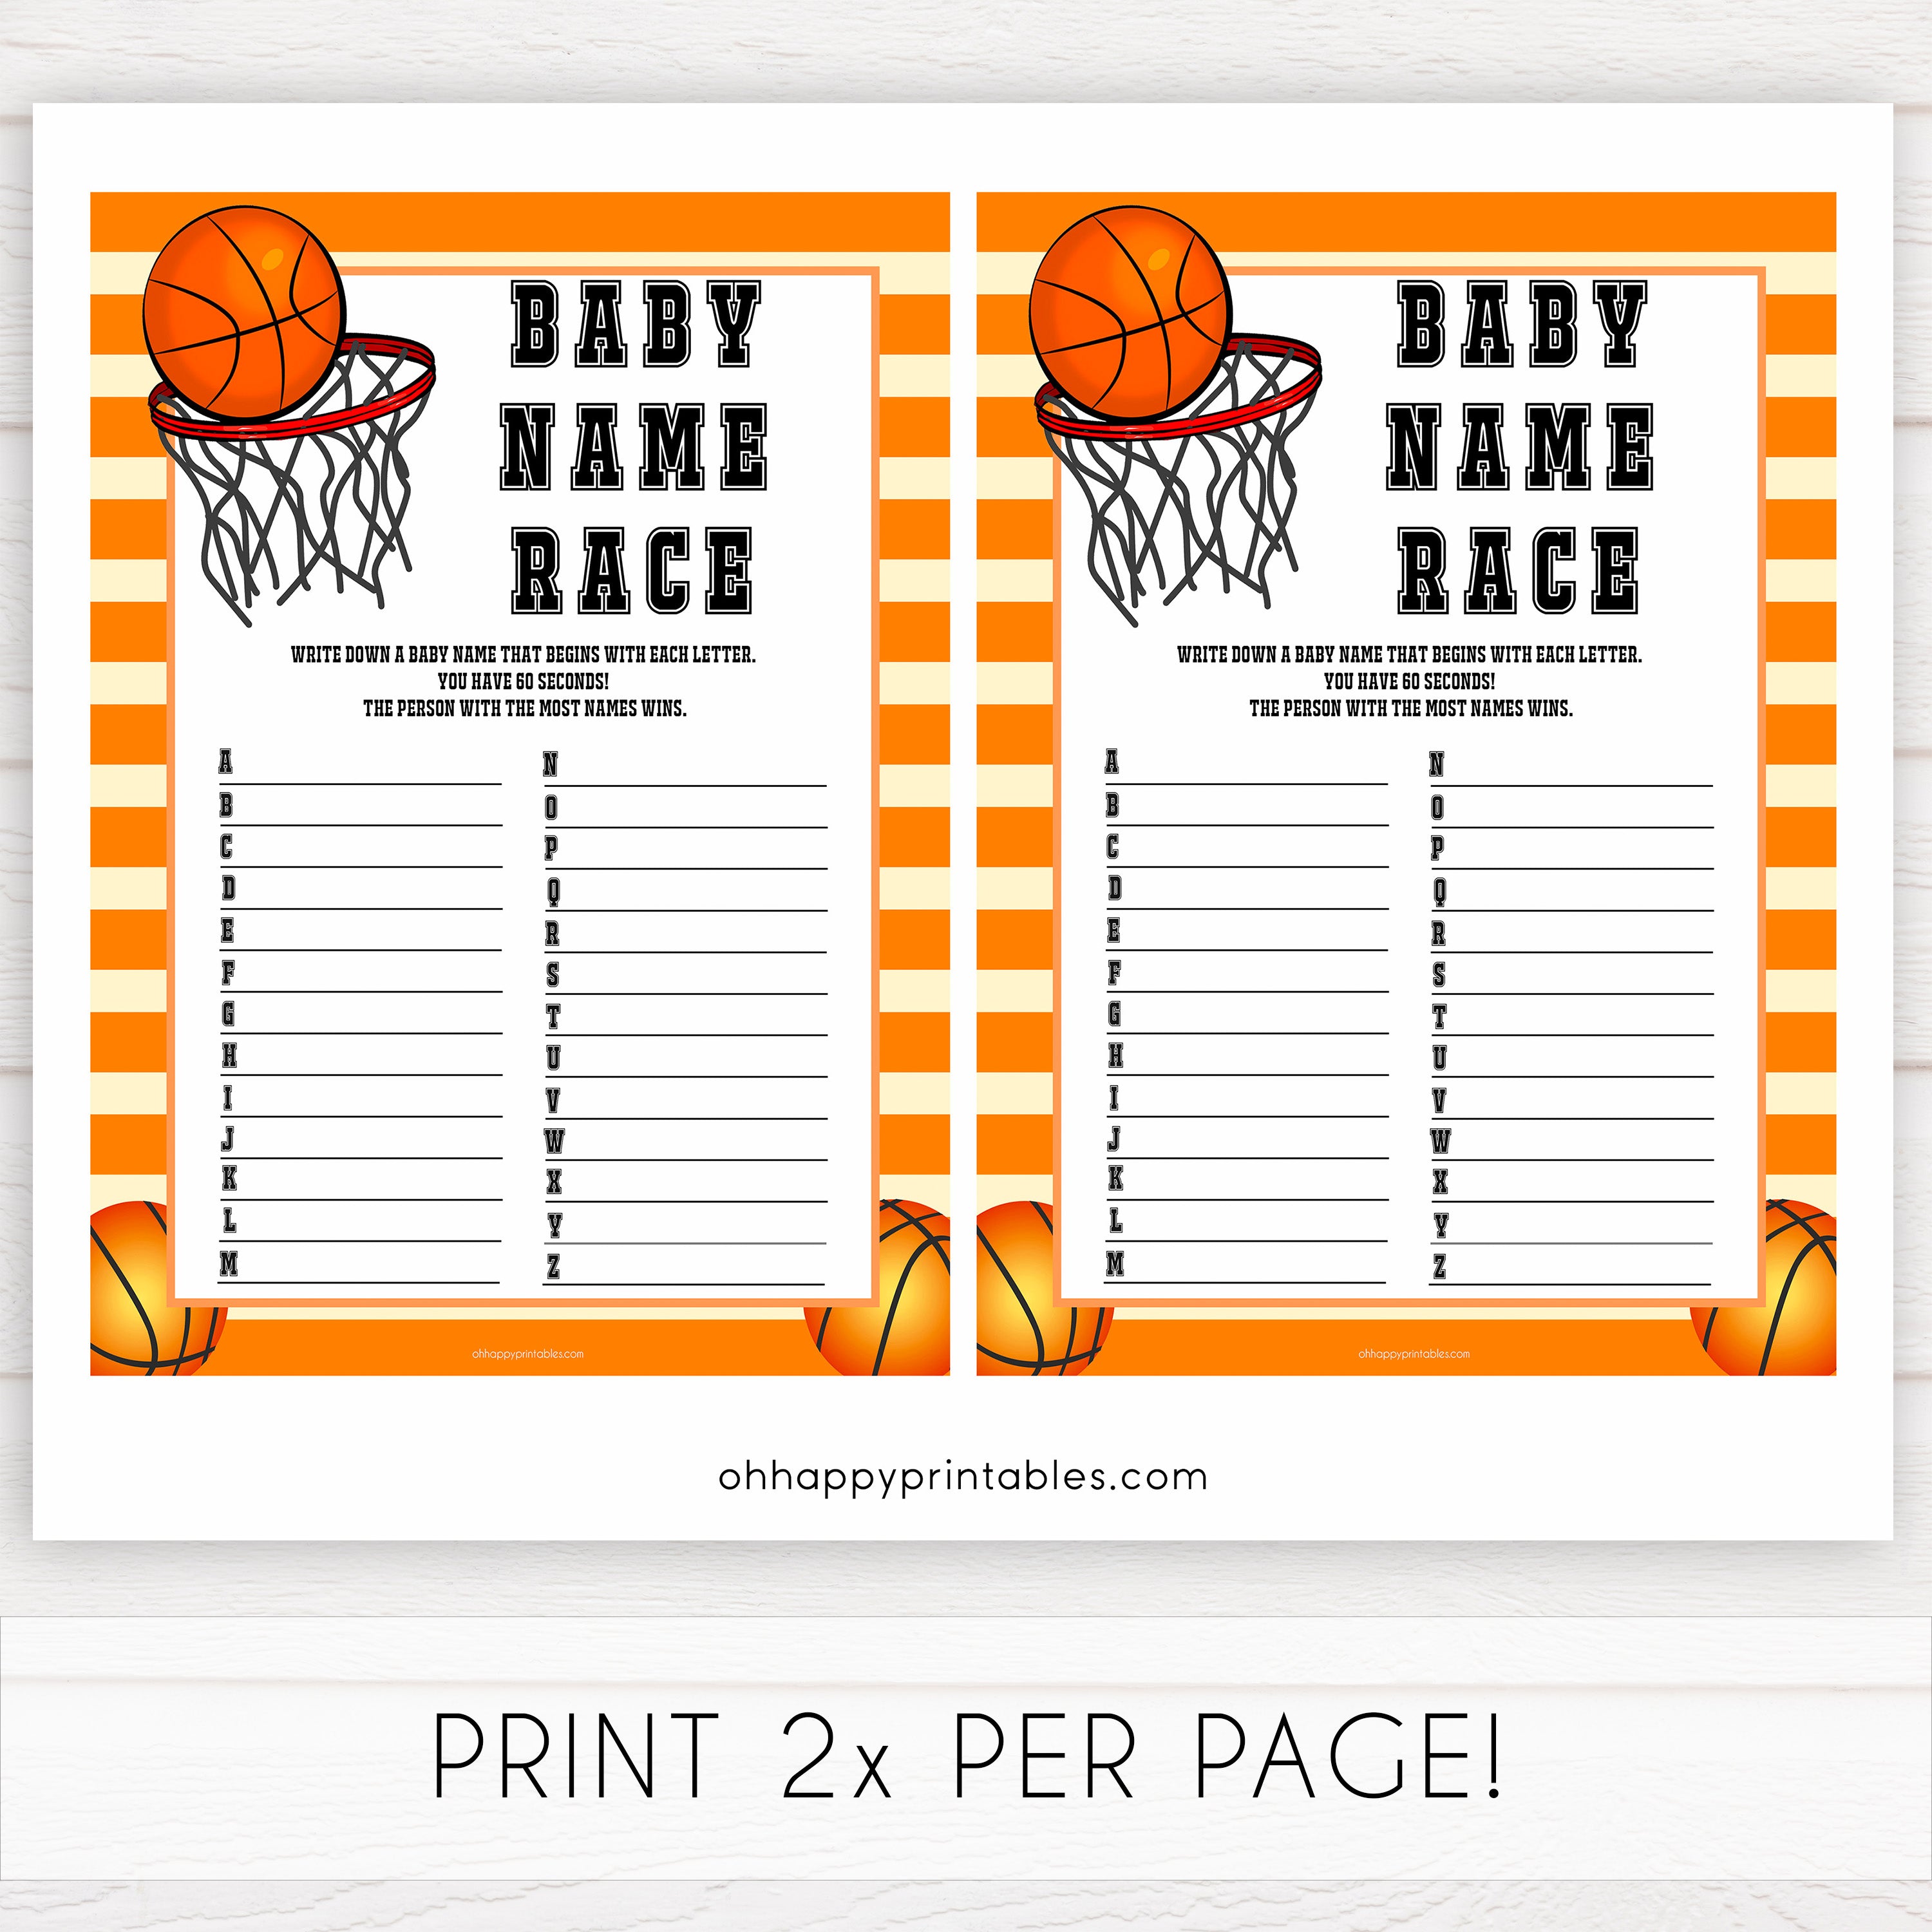 Basketball baby shower games, baby name race, baby game, printable baby games, basket baby games, baby shower games, basketball baby shower idea, fun baby games, popular baby games